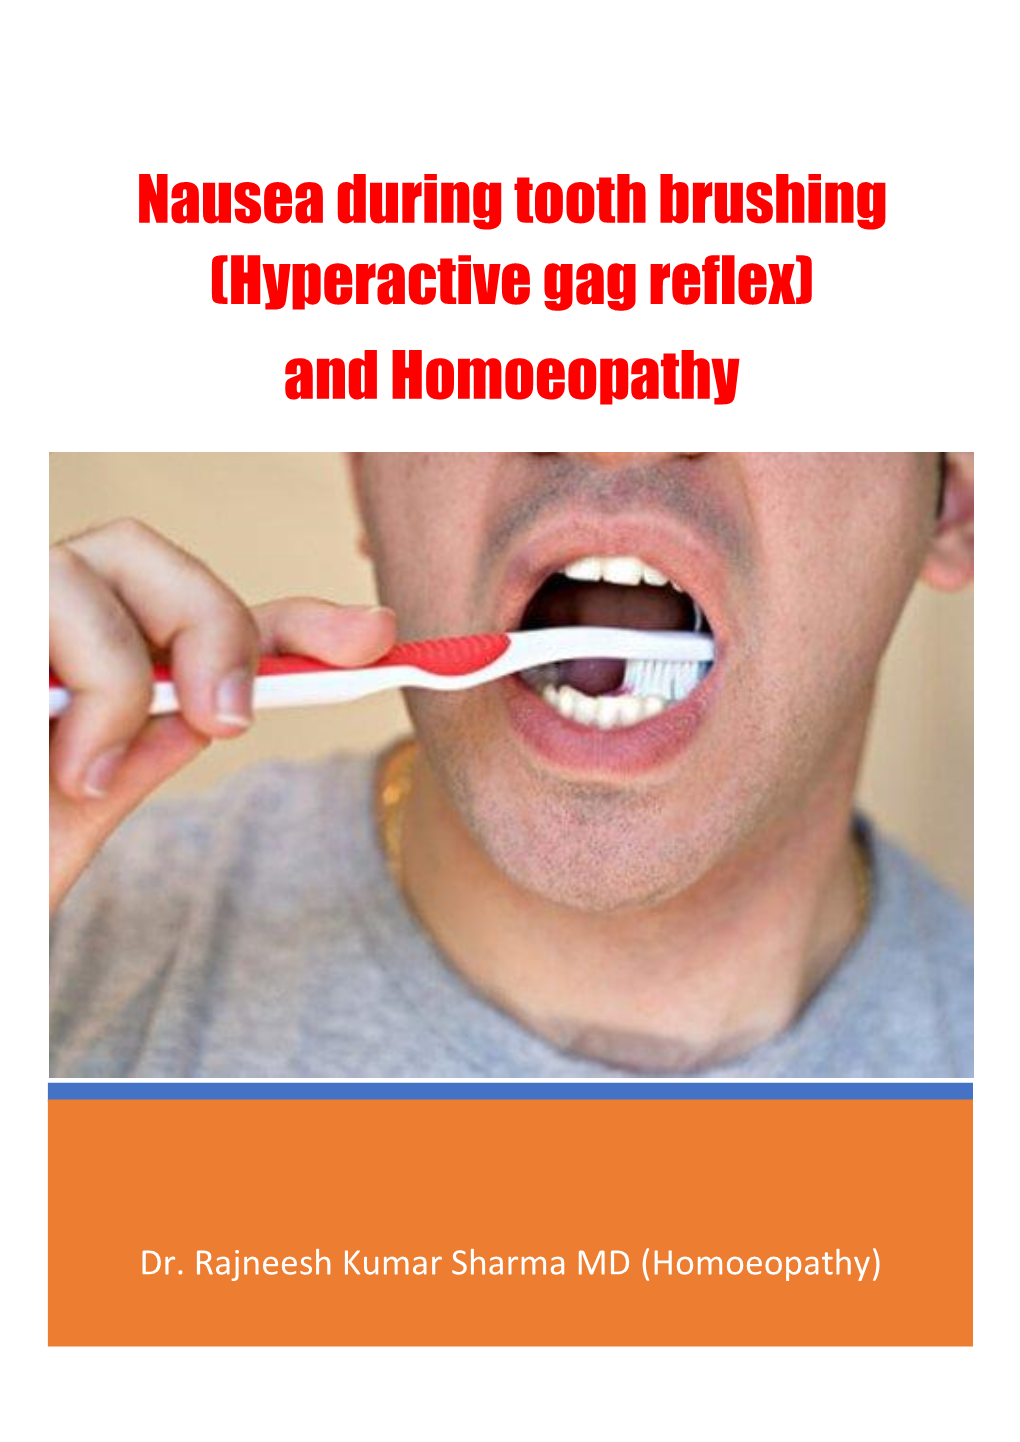 Nausea During Tooth Brushing (Hyperactive Gag Reflex) and Homoeopathy